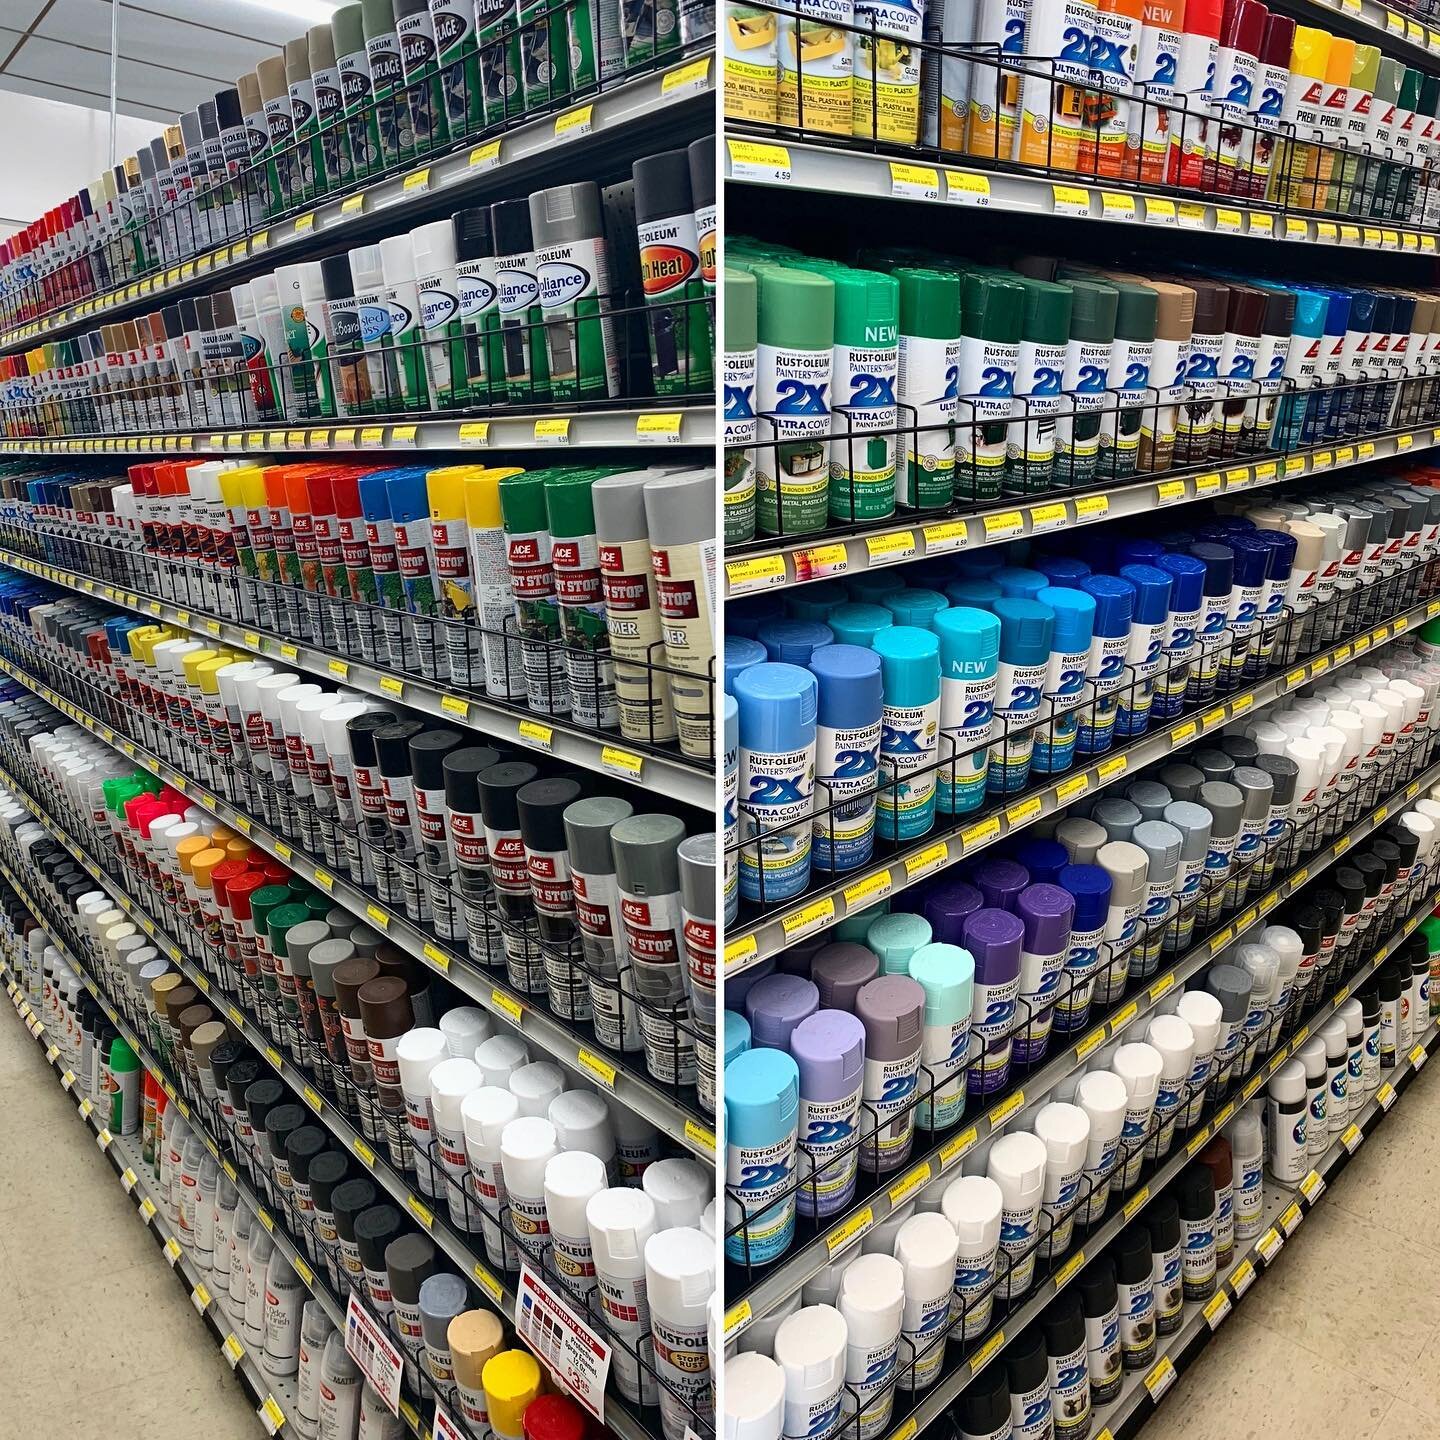 Wish I could walk into Chicago hardware stores and see a wall like this! #spraypaintforeveryone #butnotinchicago